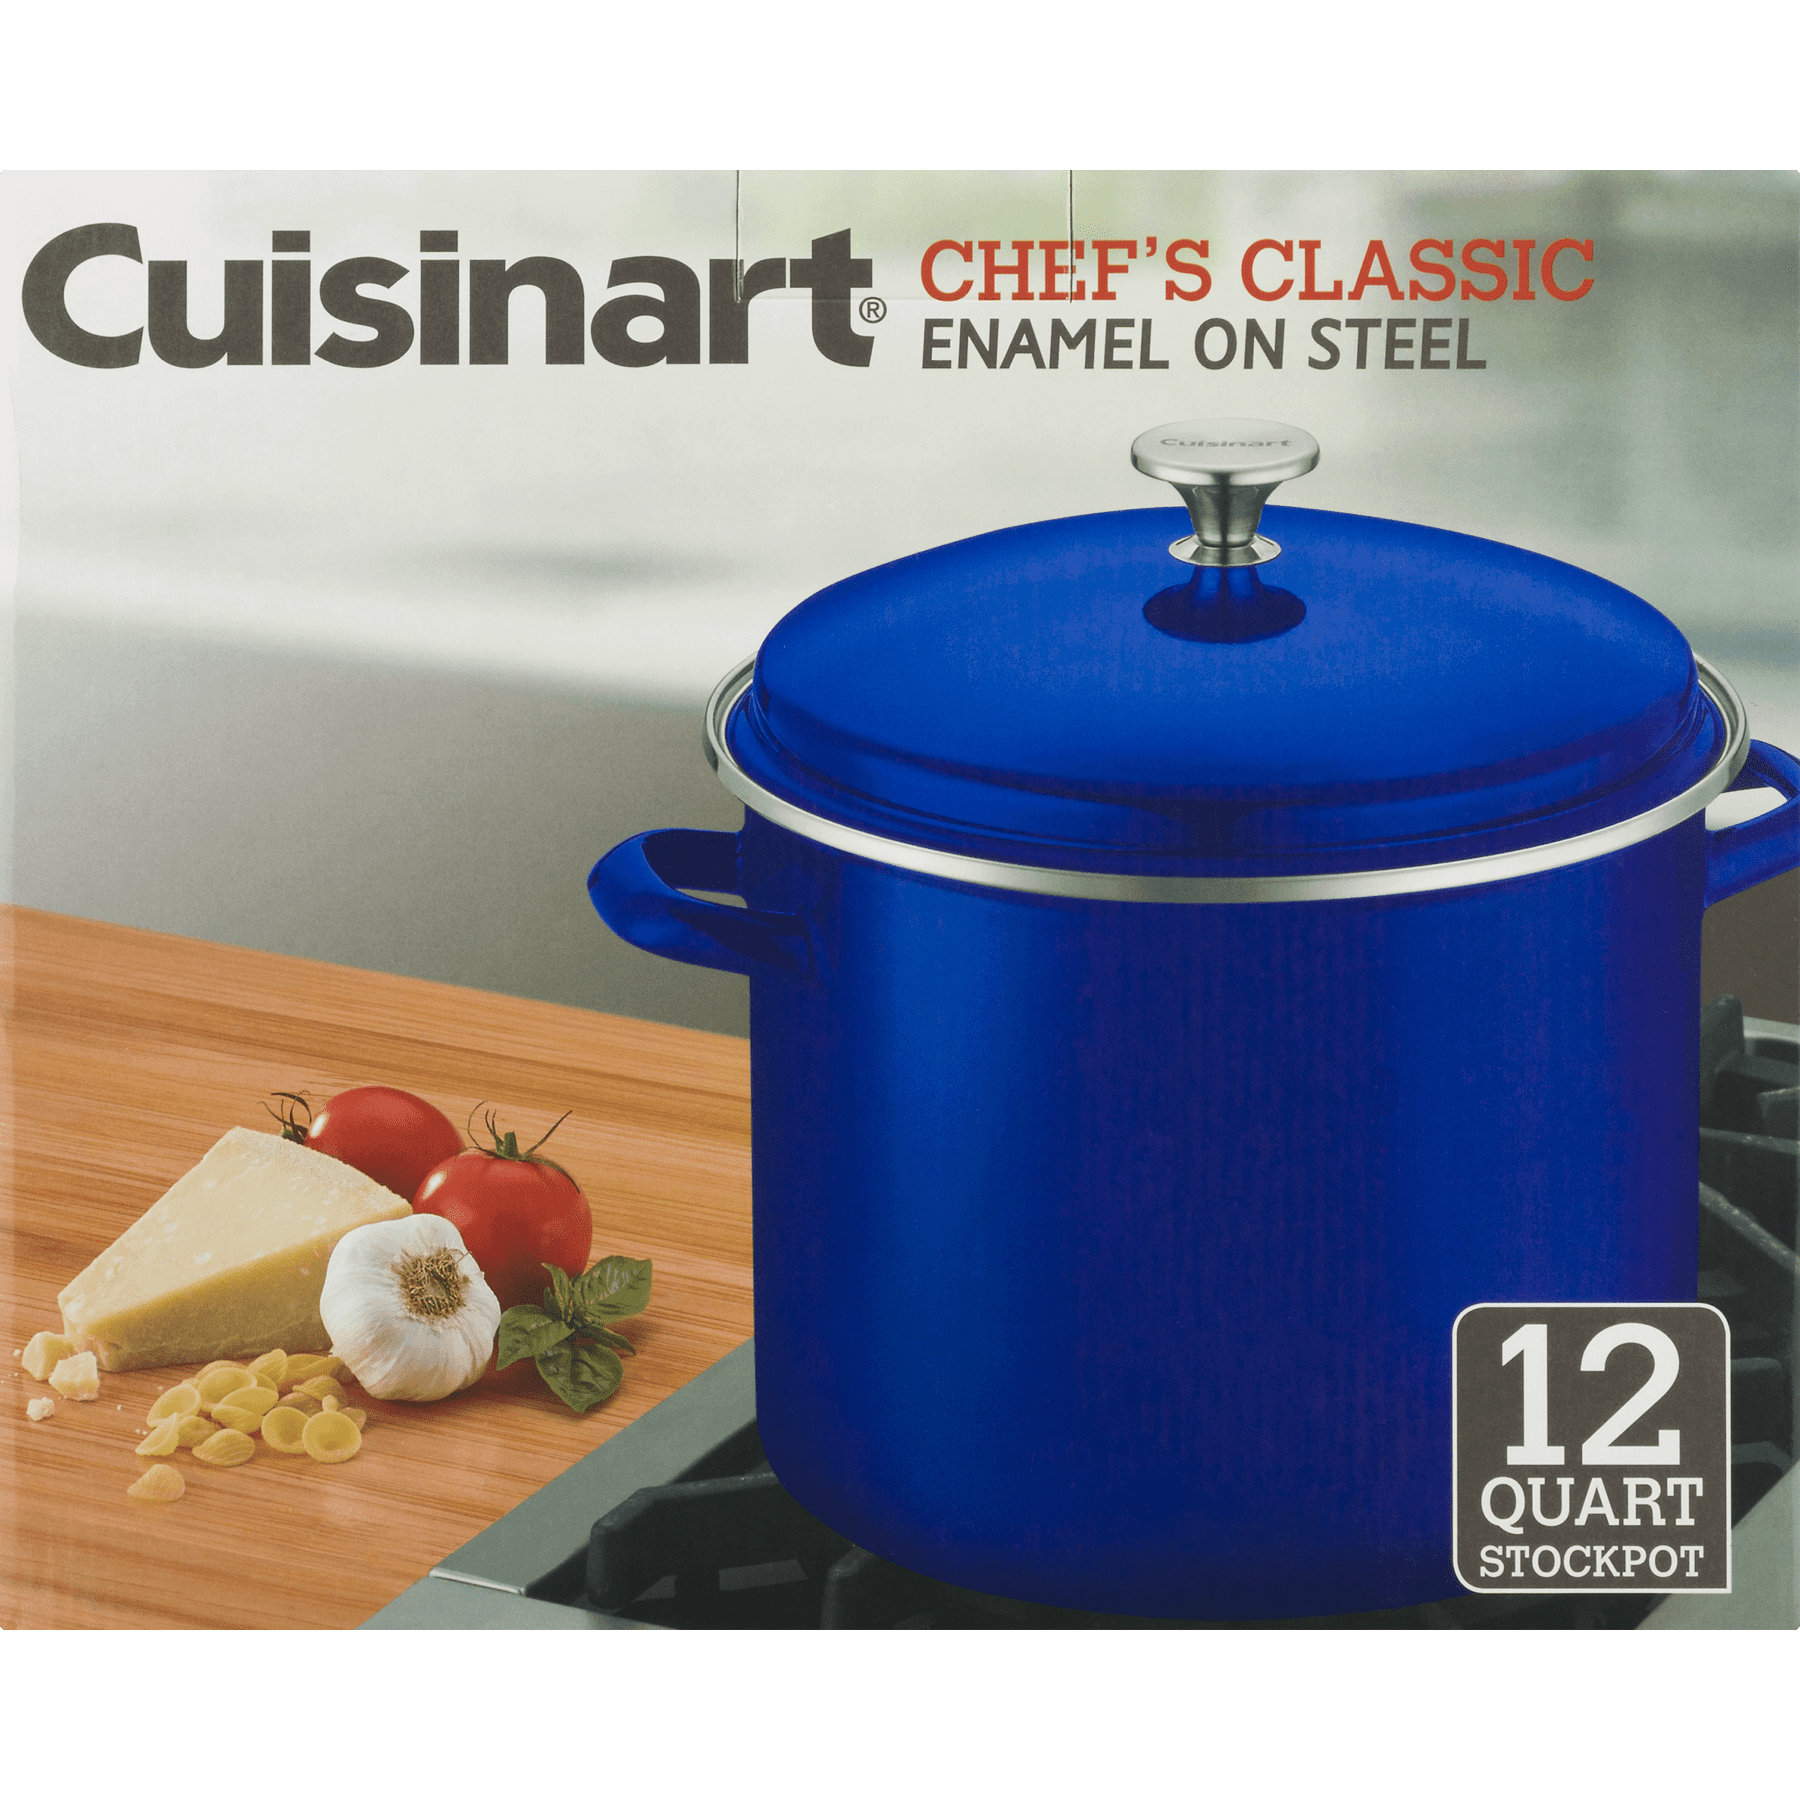 Cuisinart Chef's Classic 12-Quart Enamel on Steel Stockpot with Cover | Red